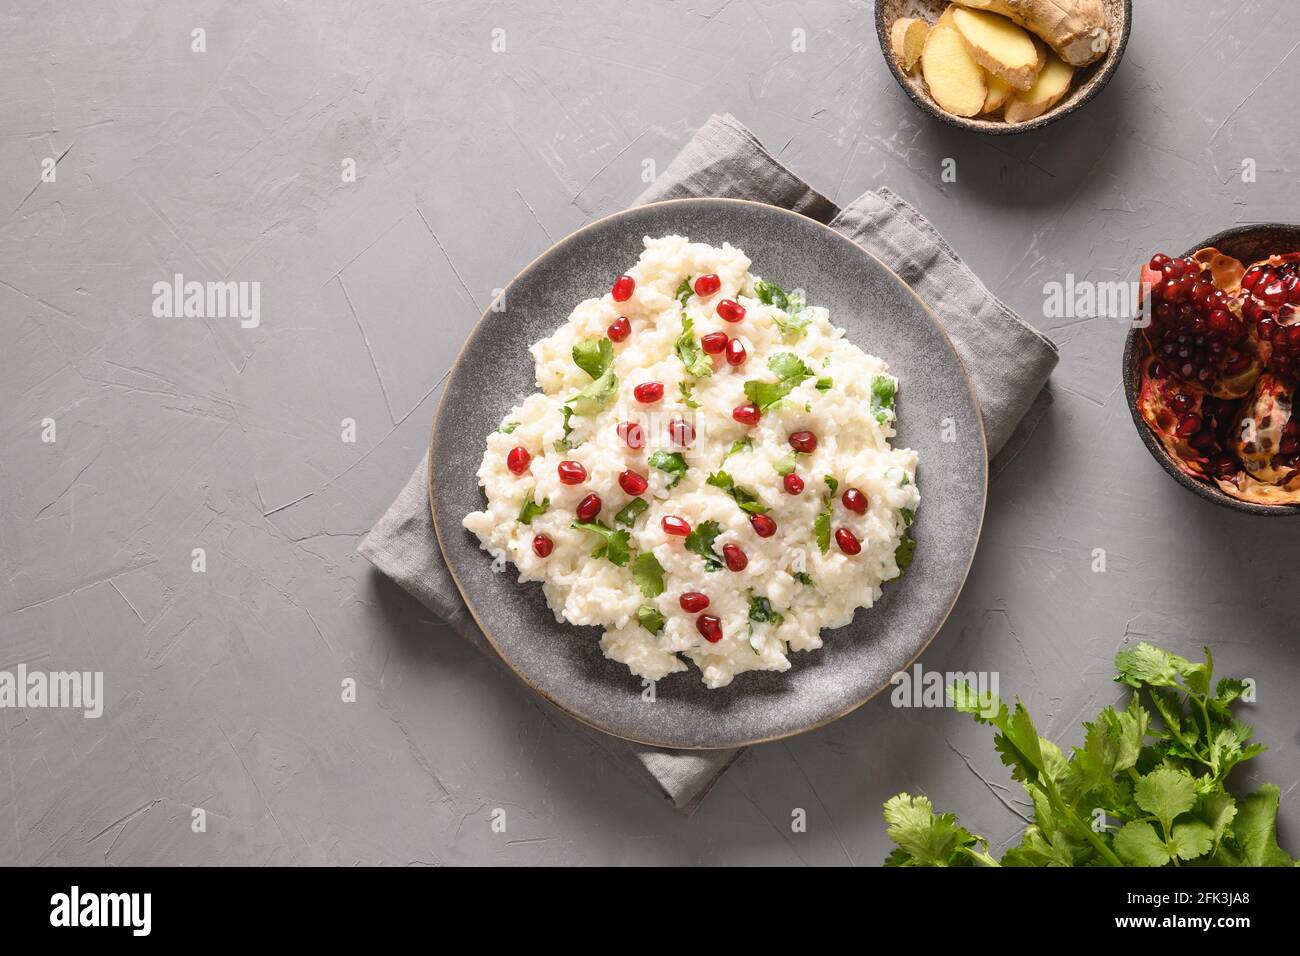 Curd Rice with cashews, grapes, cilantro on a grey background. Top view. Traditional Indian South cuisine Stock Photo